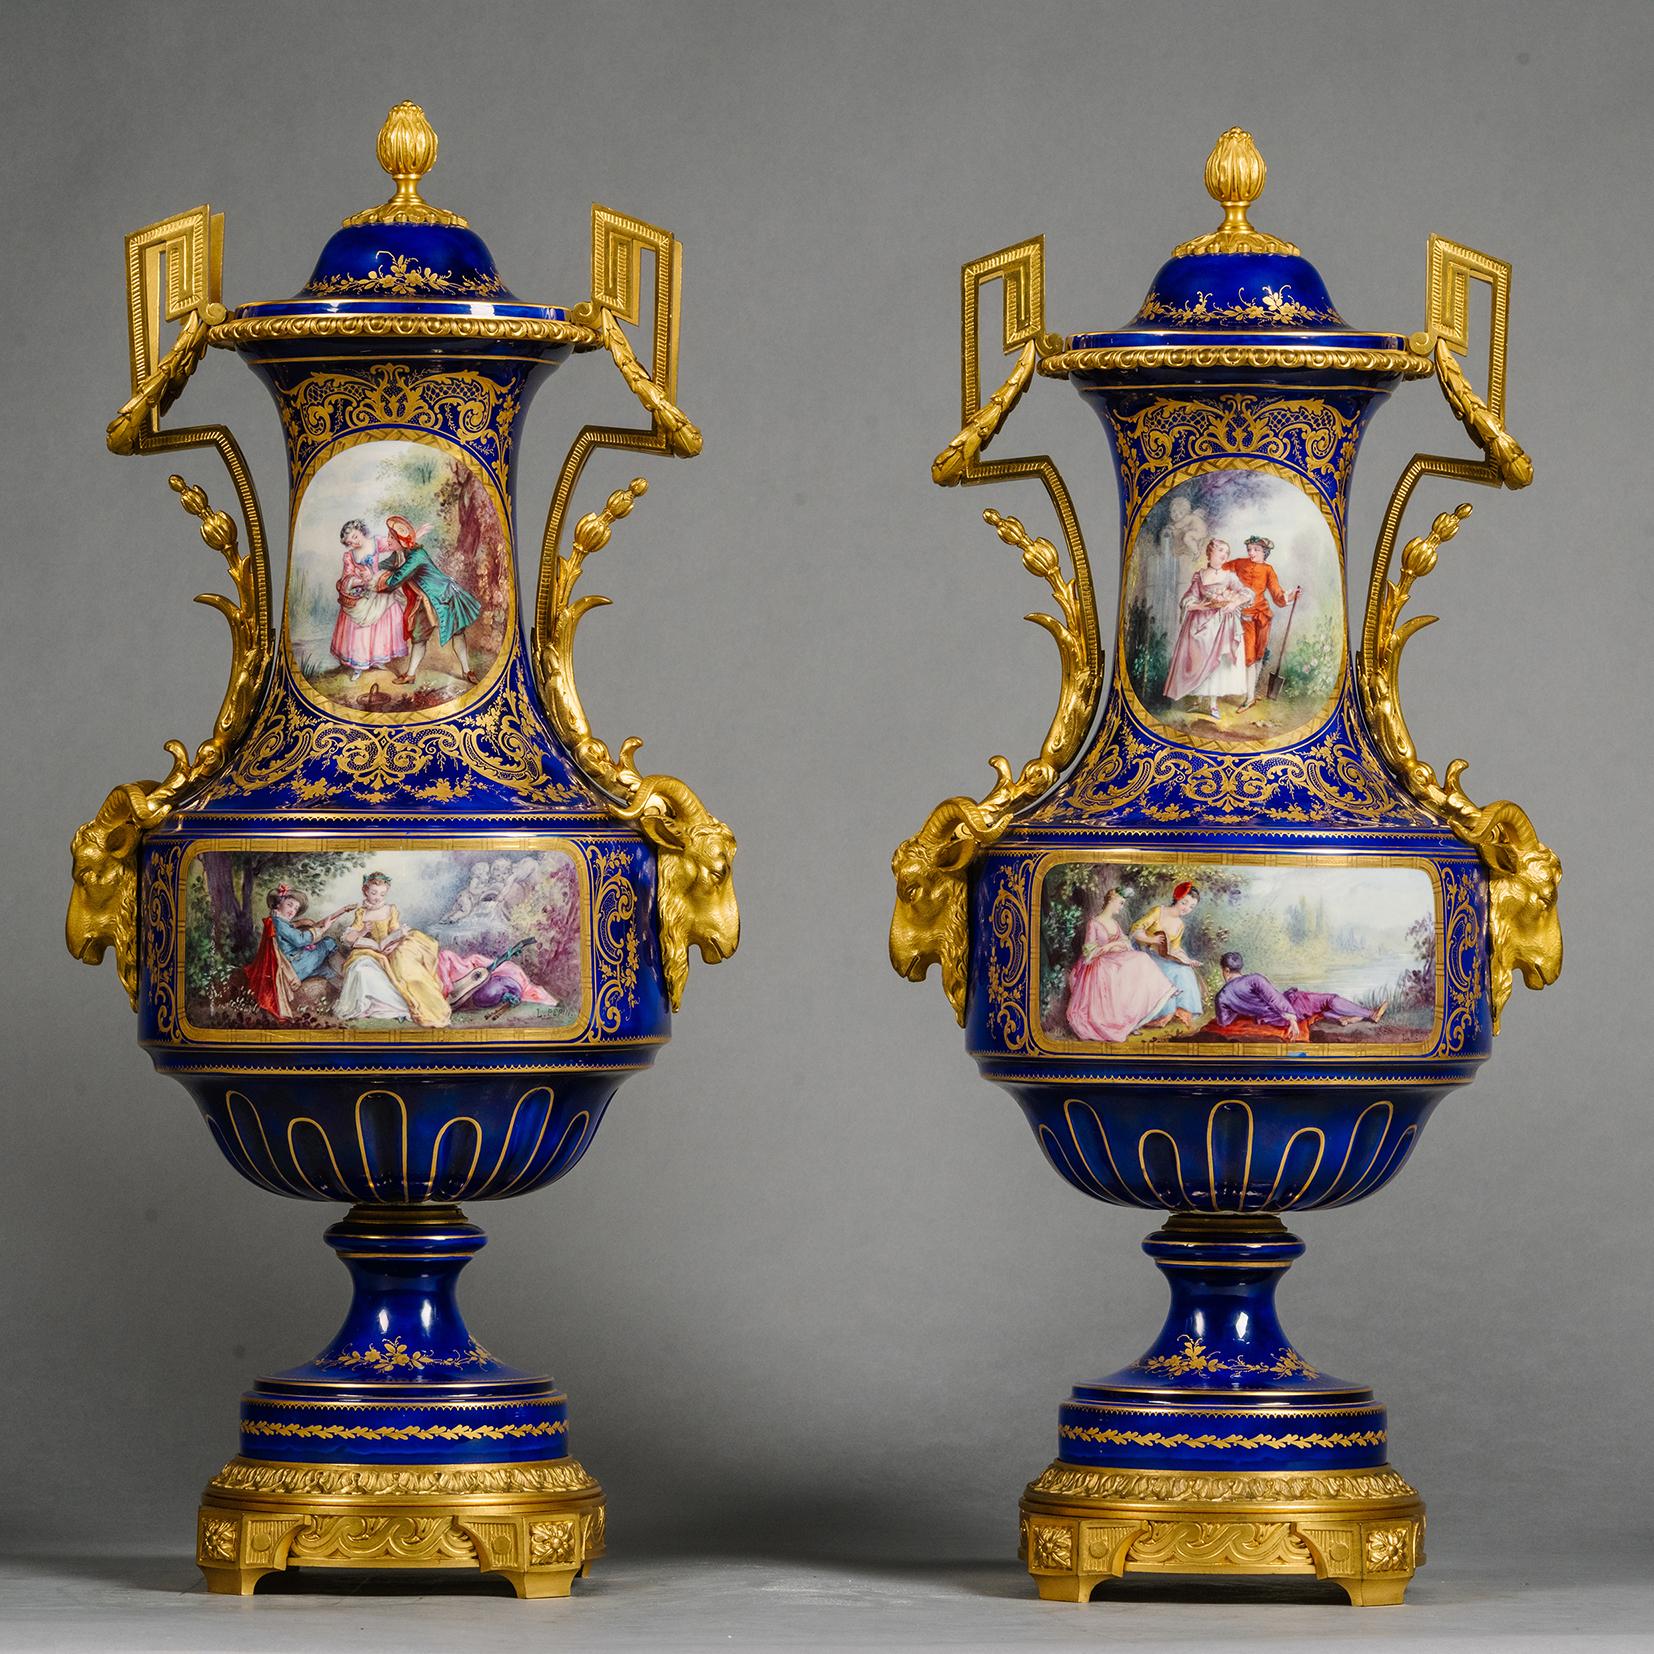 19th Century A Large Gilt-Bronze and Sèvres Style Porcelain Three-Piece Clock Garniture For Sale